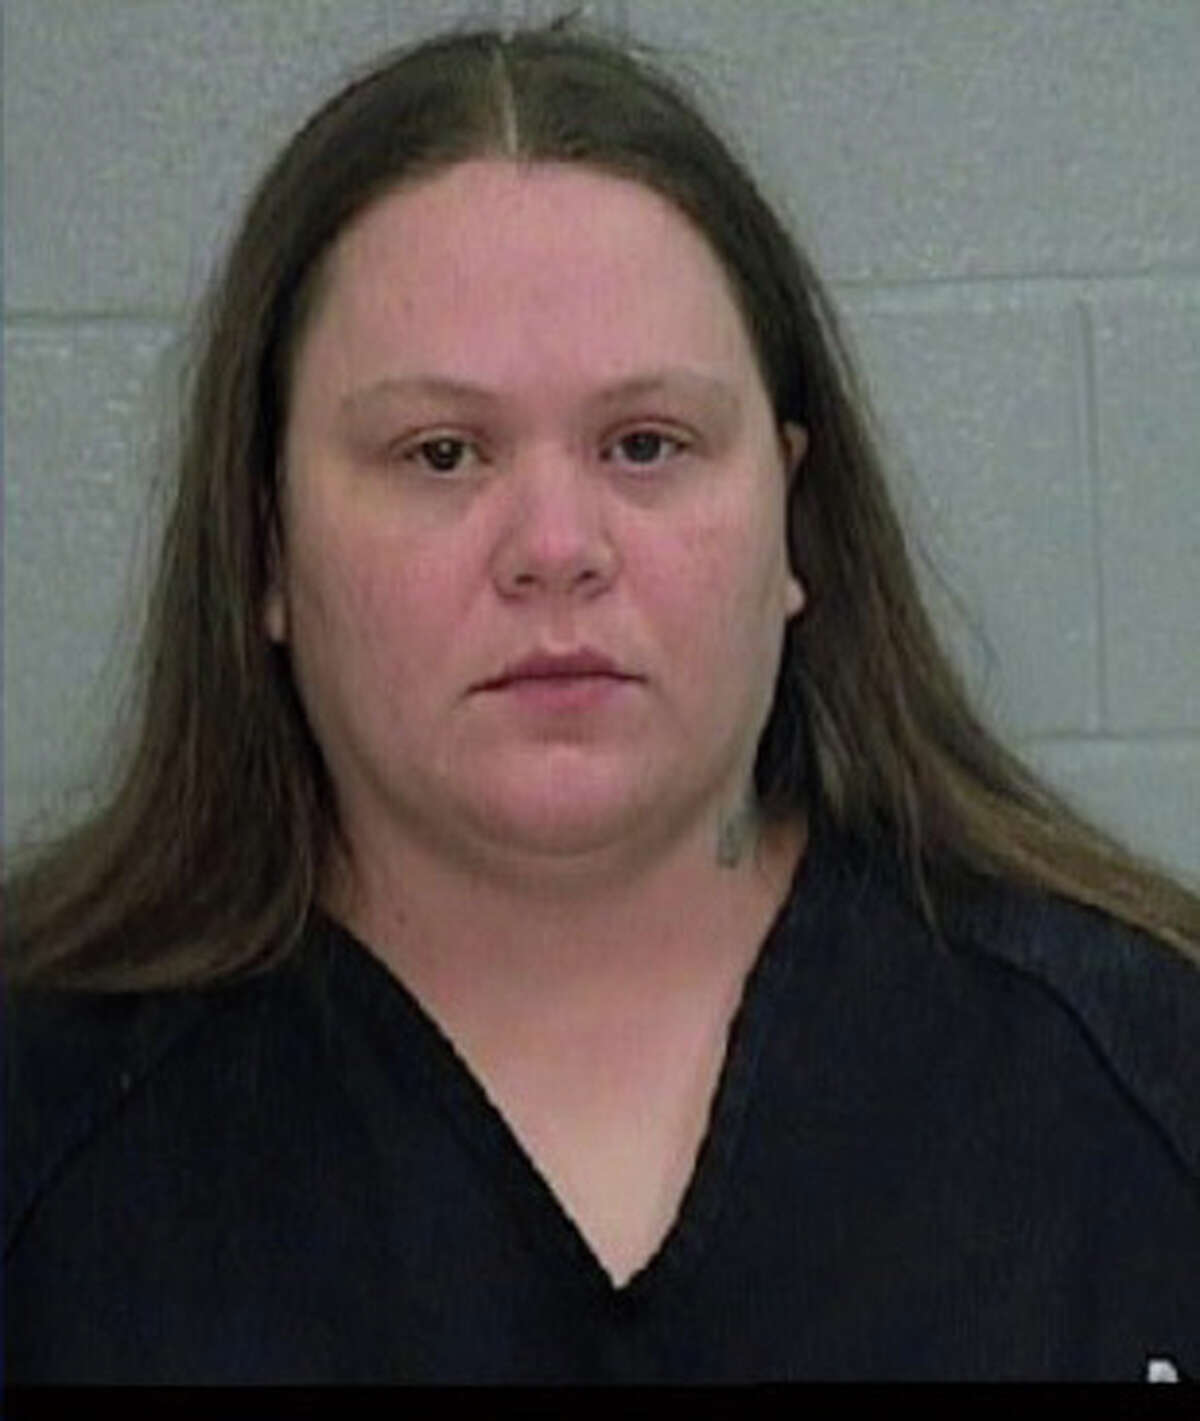 Tonya Carroll, of Odessa, was charged with multiple counts of injury to a child. She was sentenced to 50 years in prison.